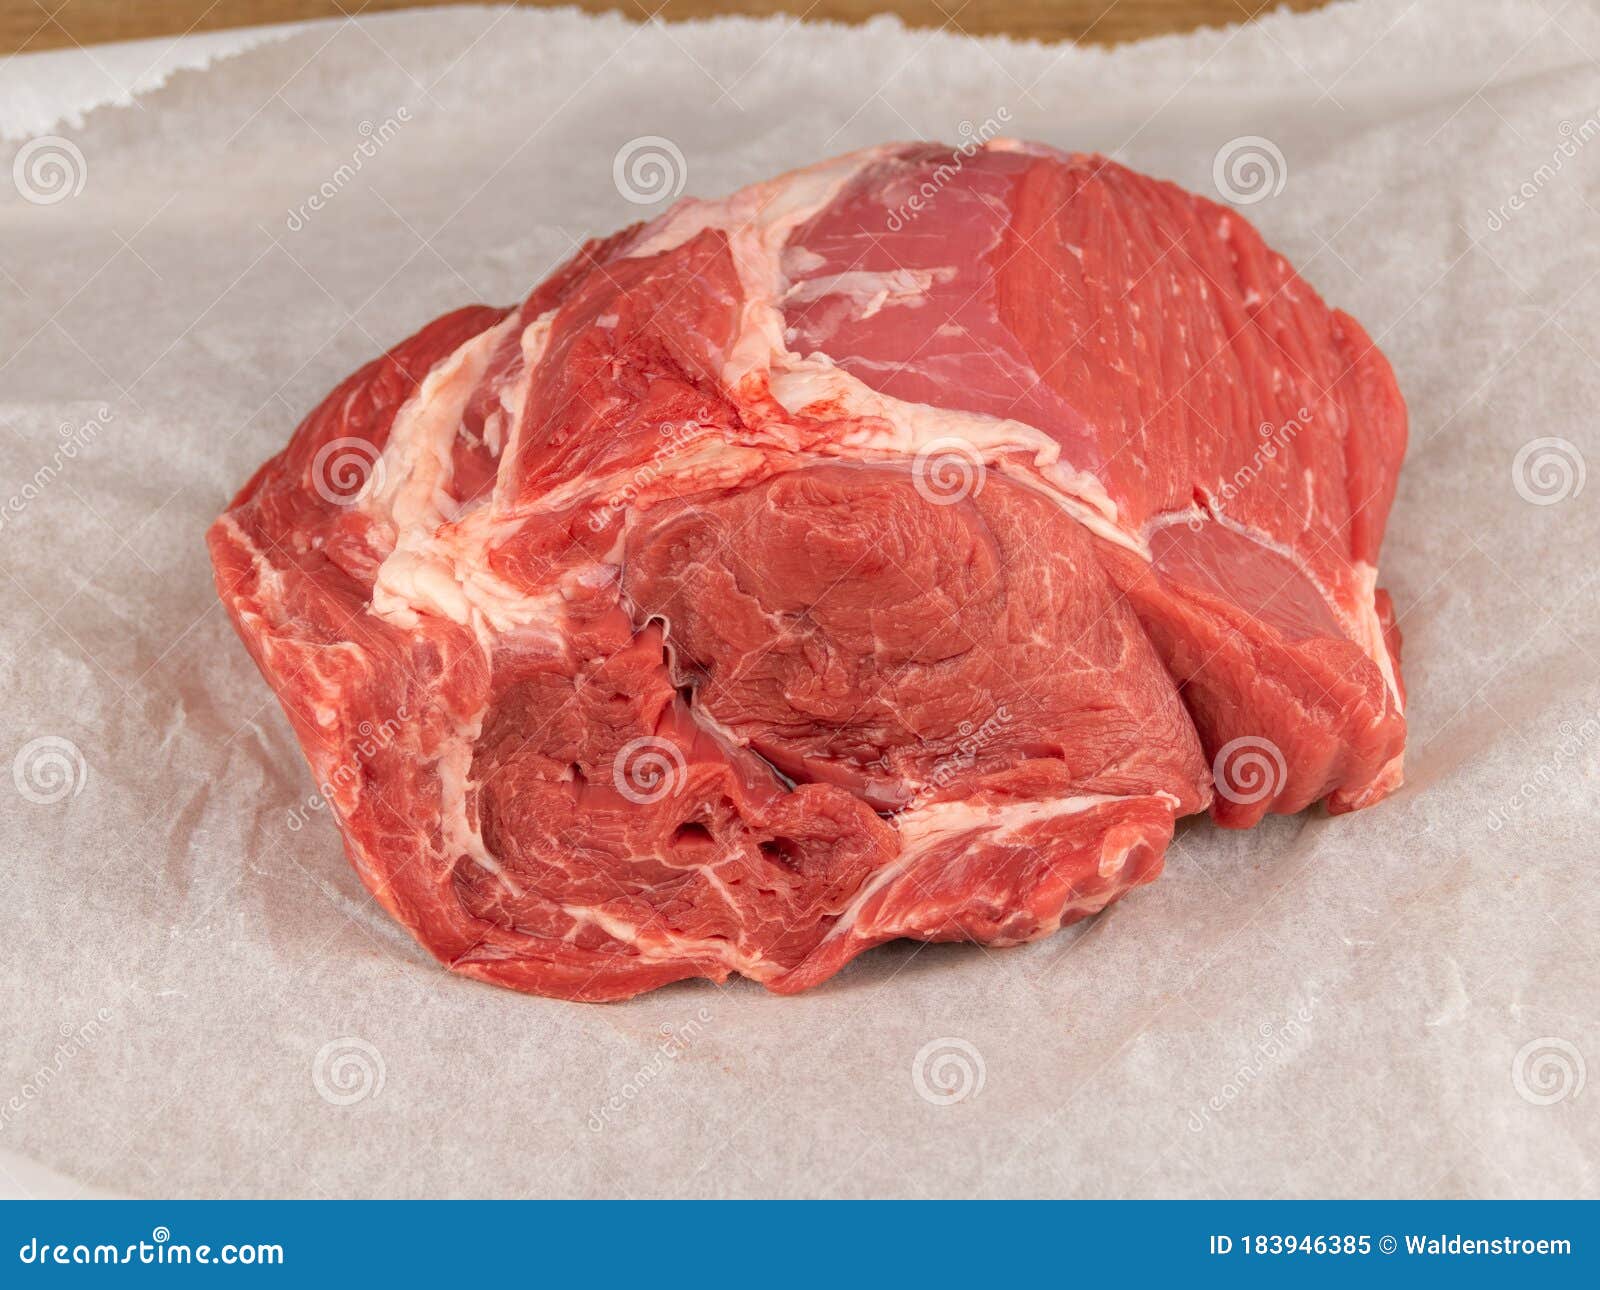 raw beef clod on white wrapping paper closeup